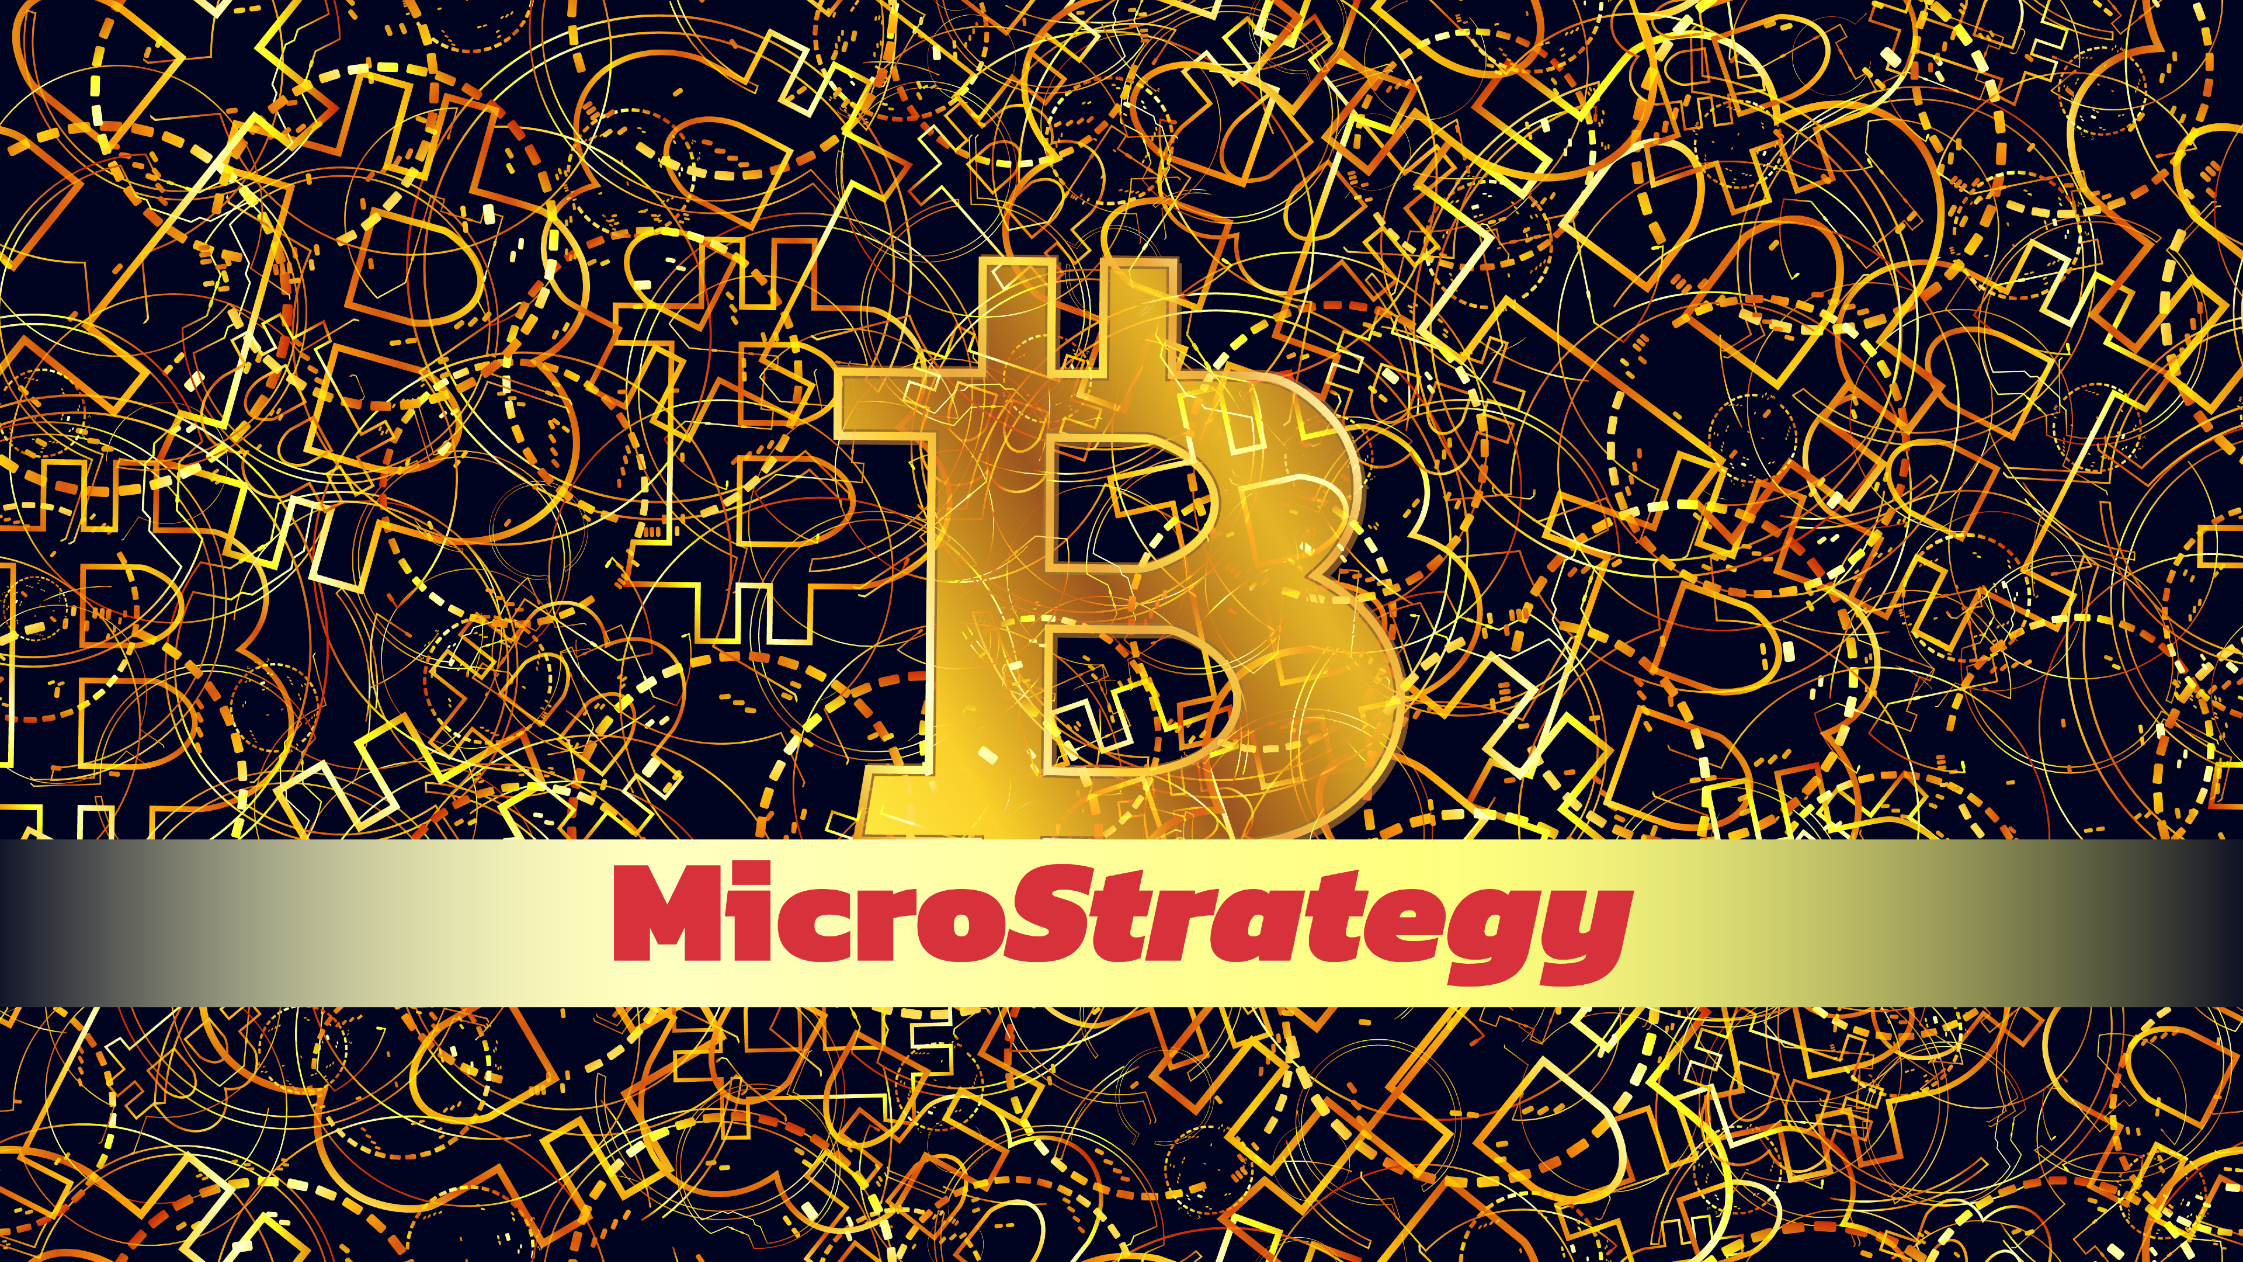 Microstrategy announced a Bitcoin purchase worth roughly $42.8 million while MSTR pains a bearish setup.